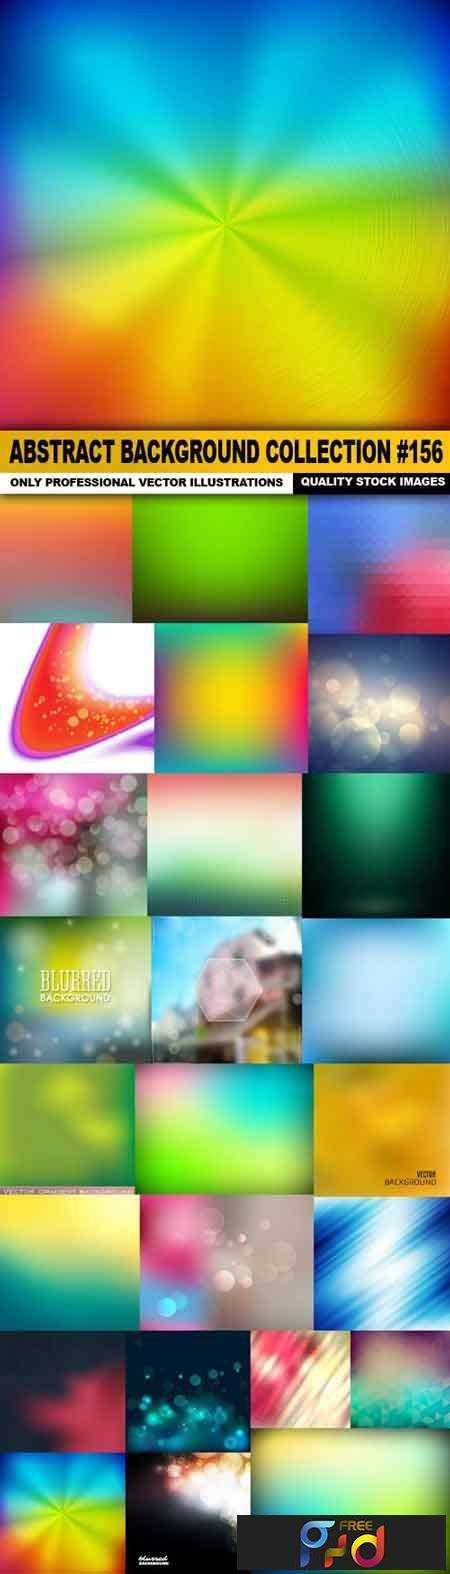 FreePsdVn.com_VECTOR_1701271_abstract_background_collection_156_25_vector